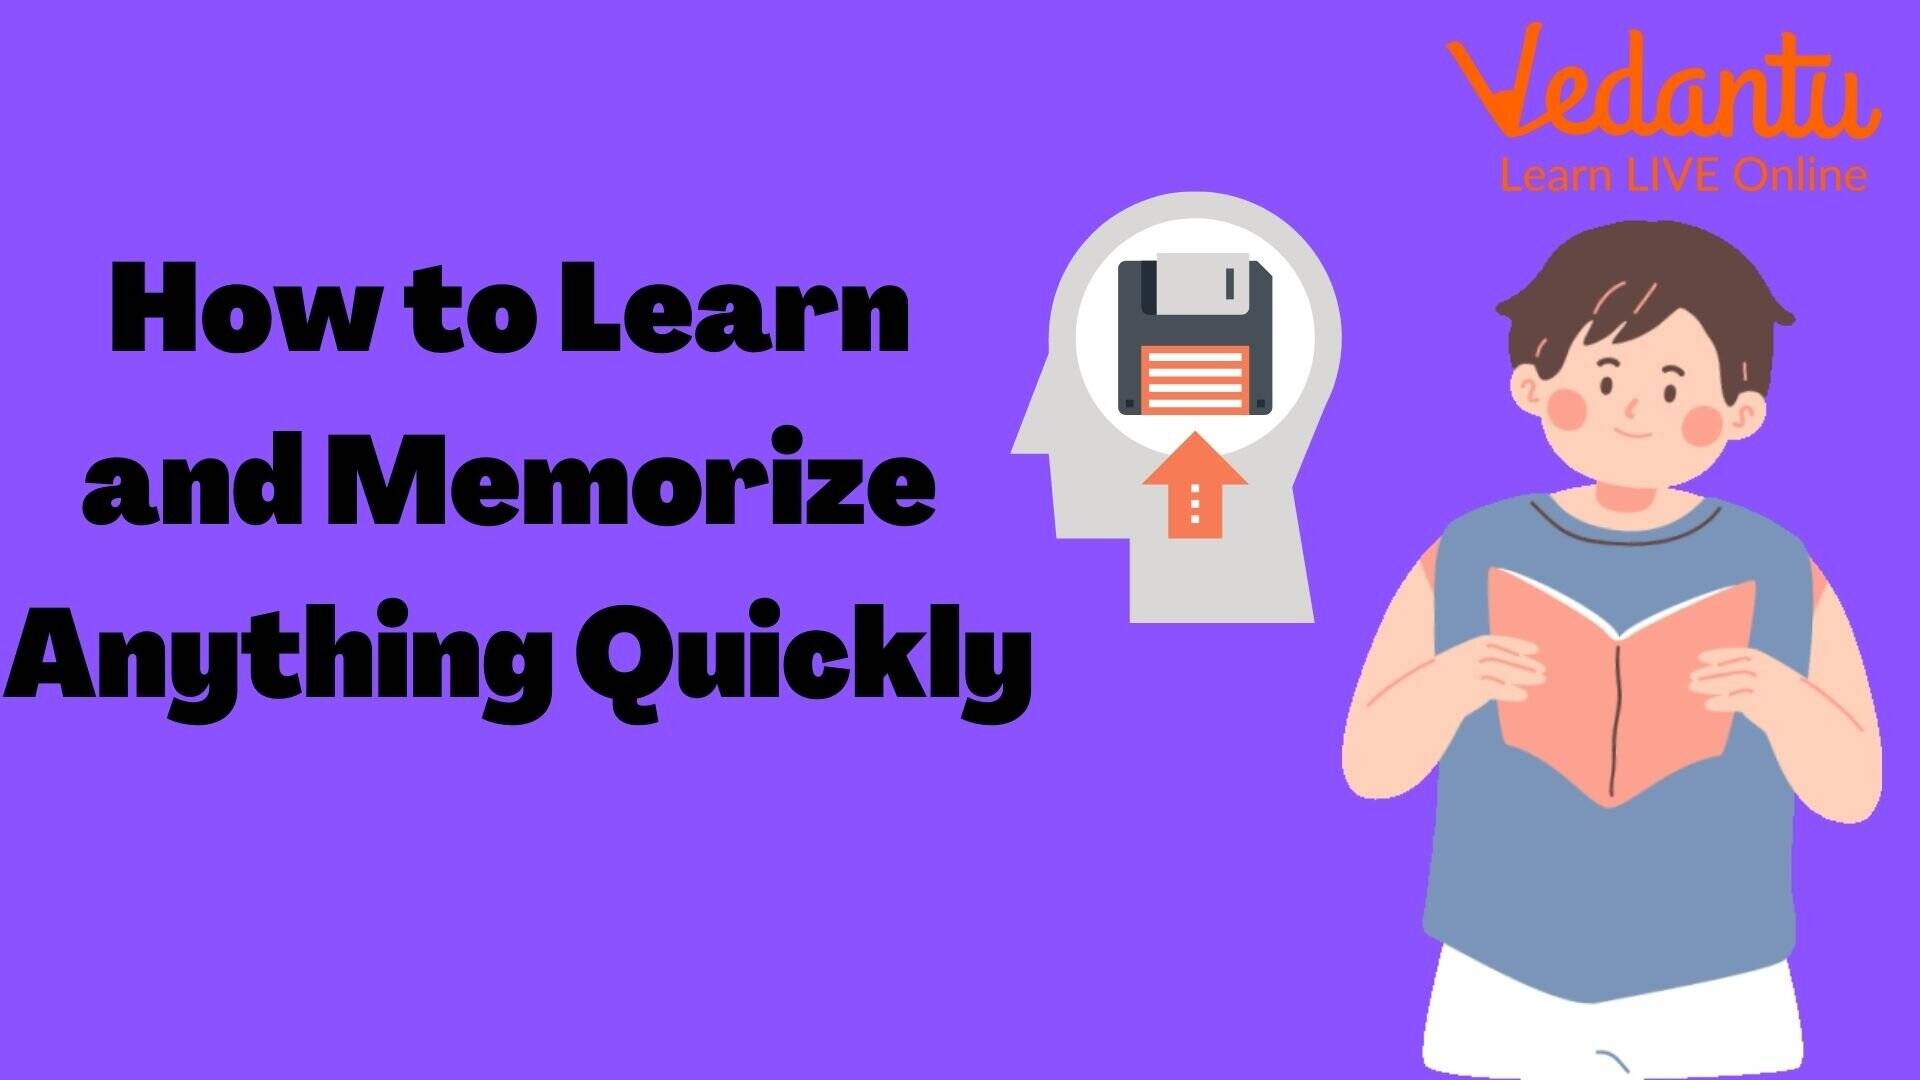 How to Learn and Memorize Anything Quickly